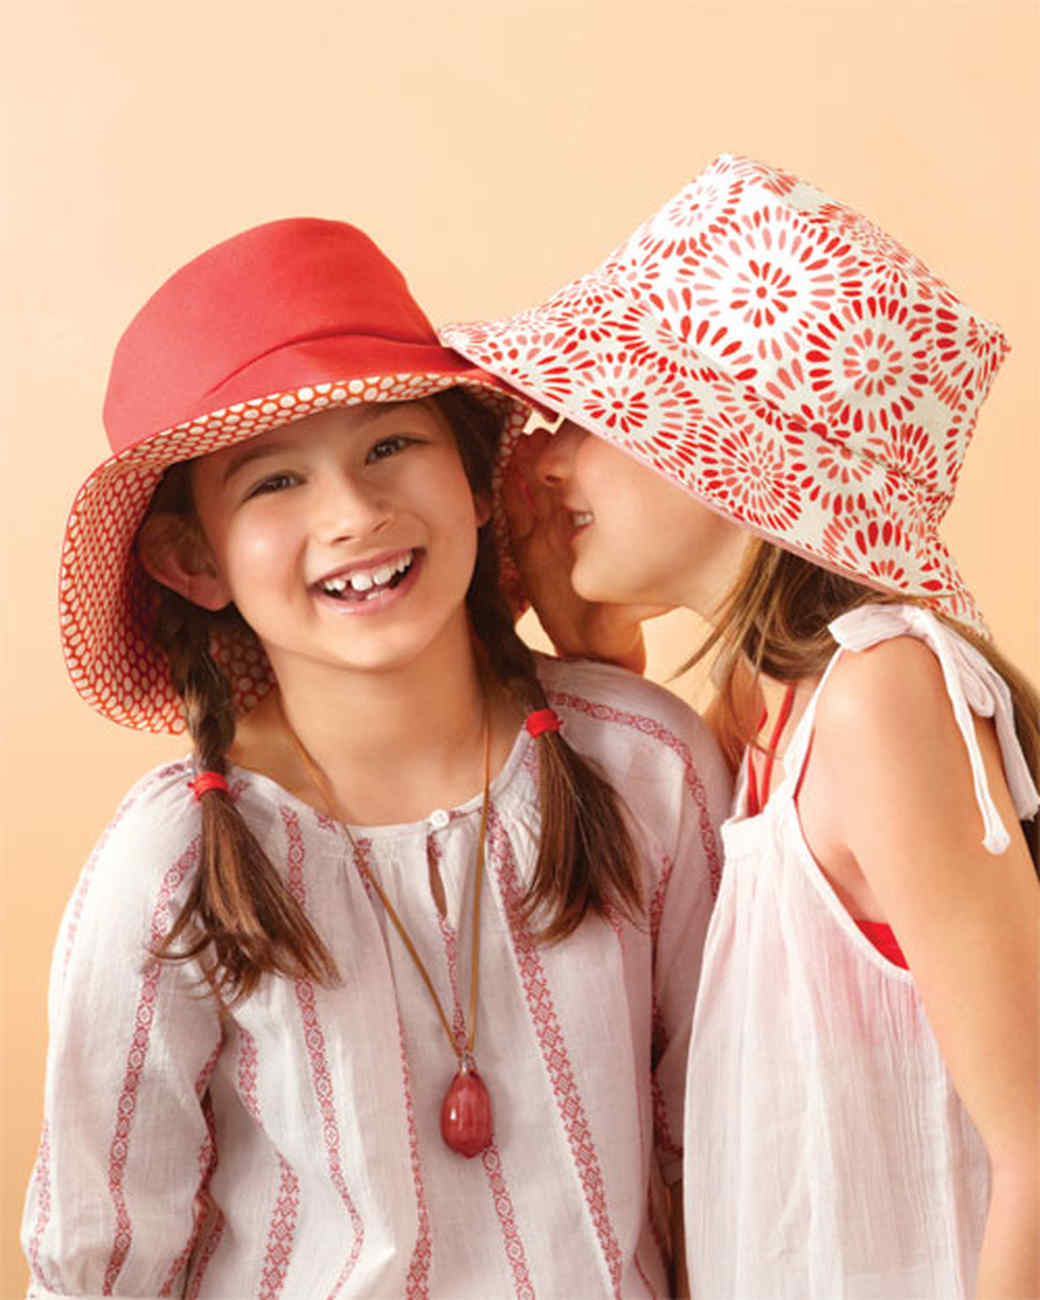 Bucket Hat Sewing Pattern For Adults